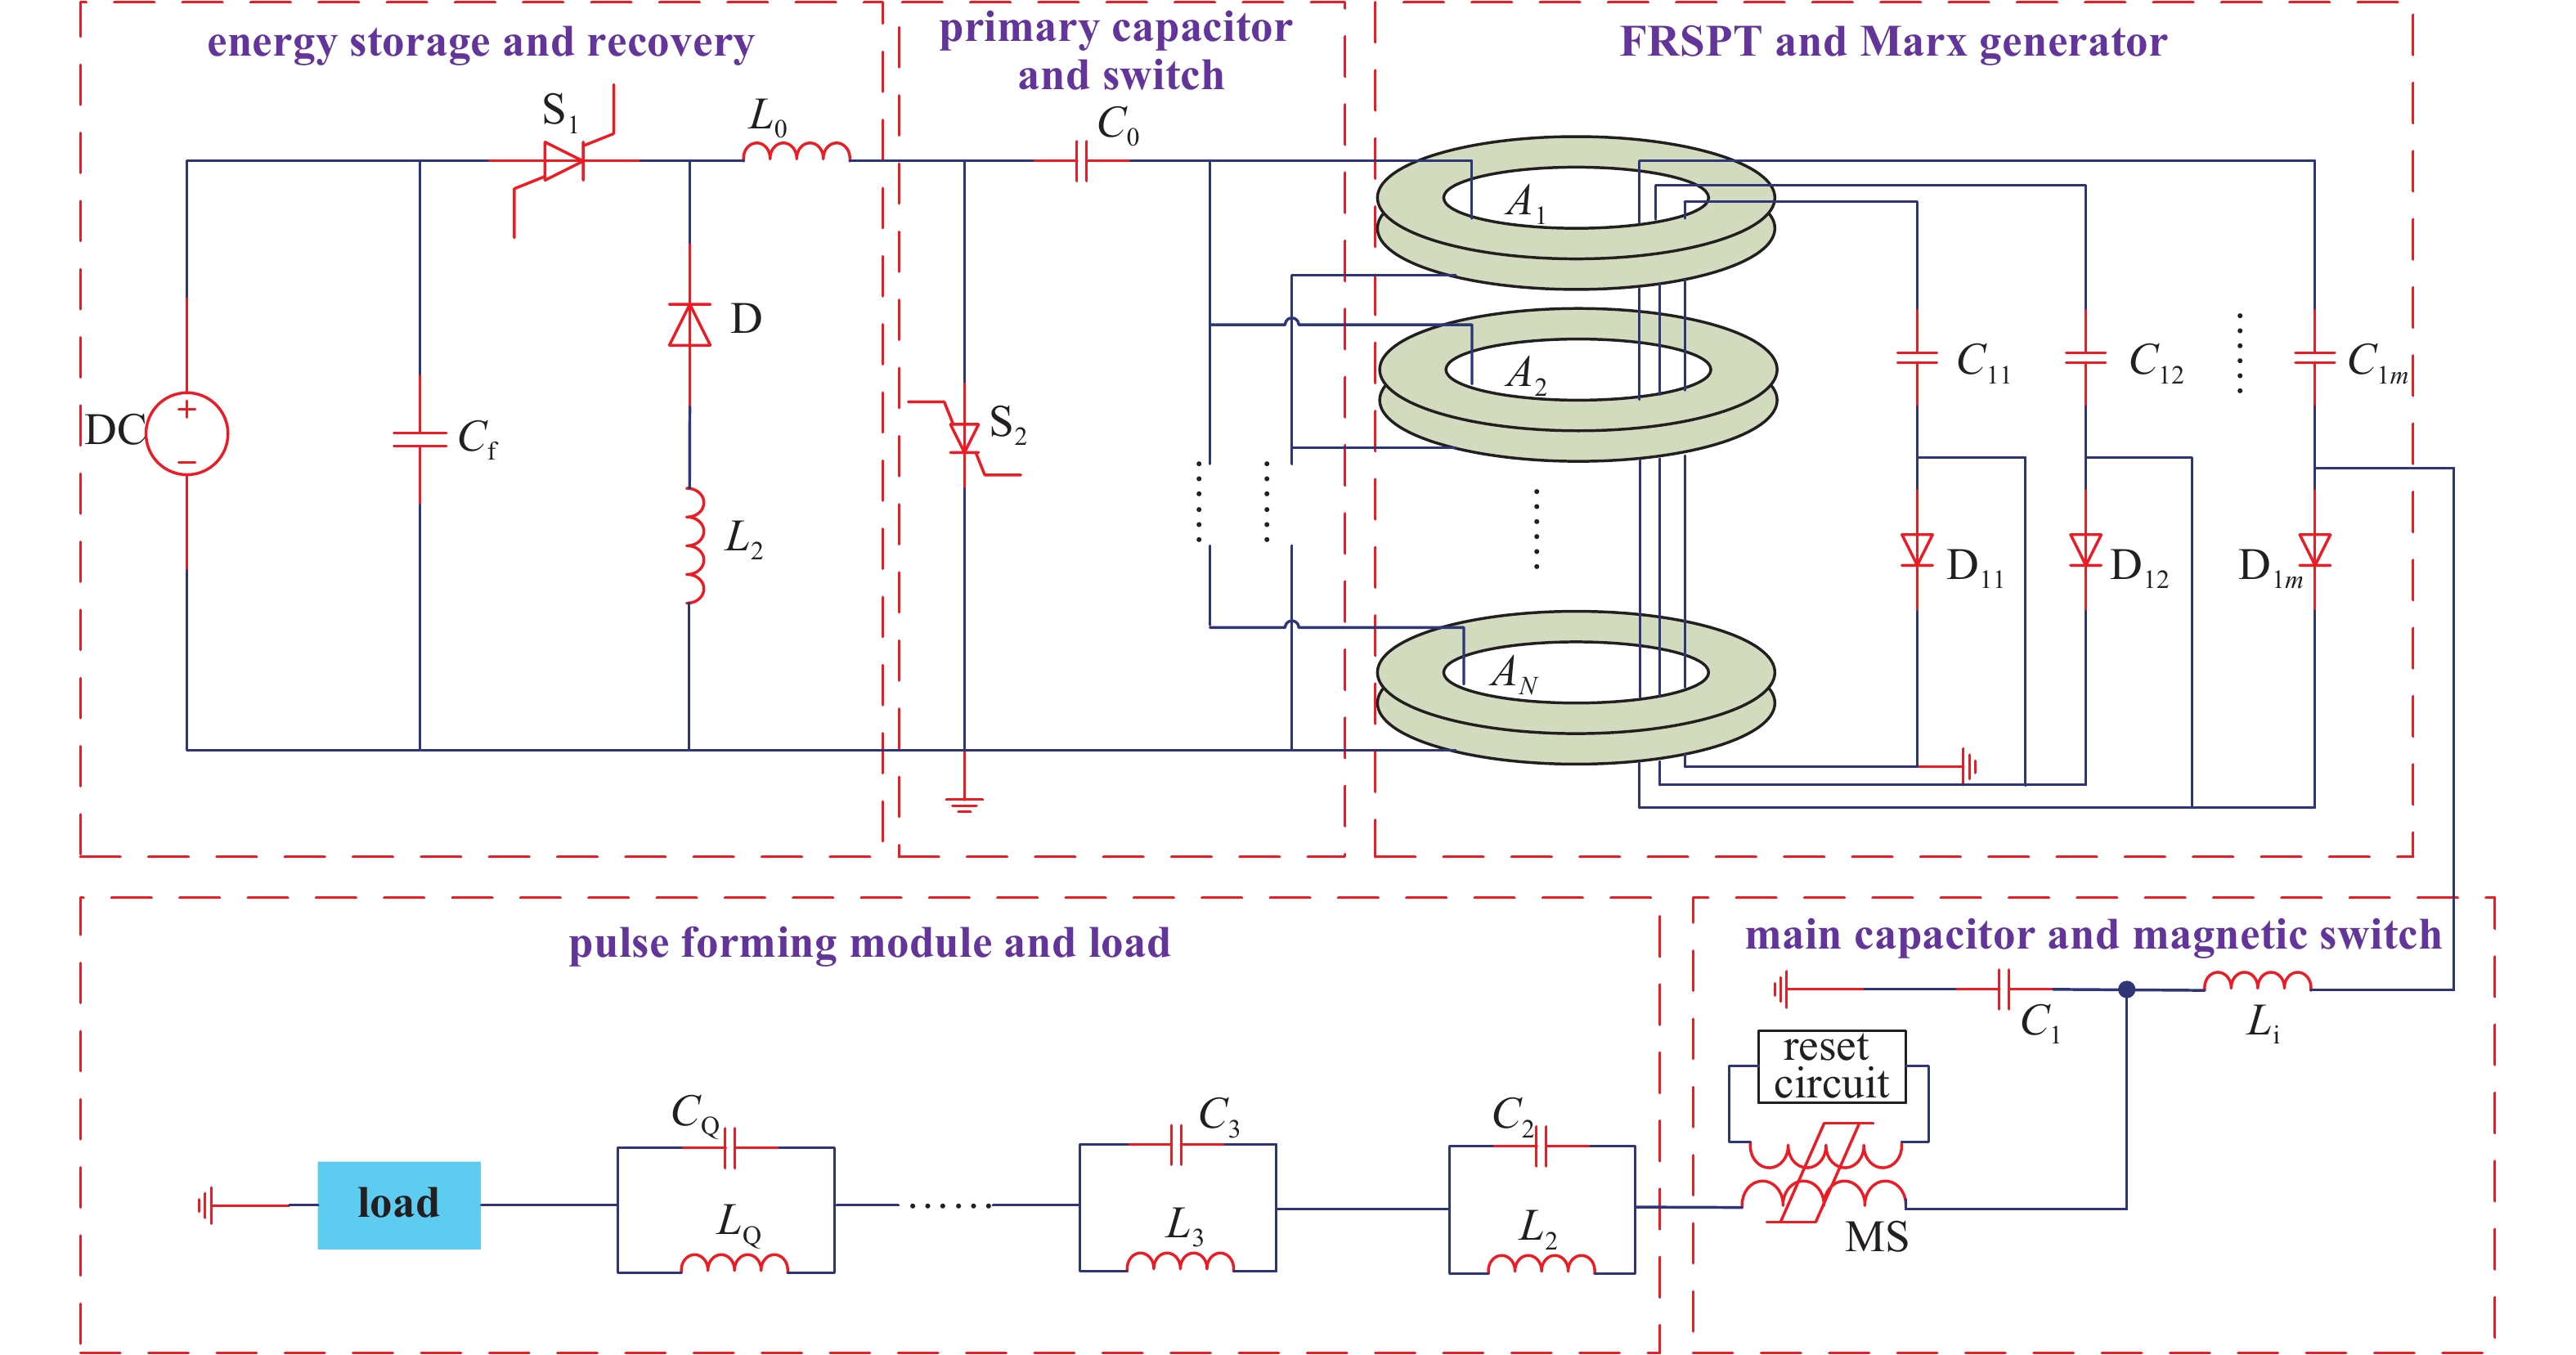 Schematic diagram of the all-solid long pulse generator based on FRSPT